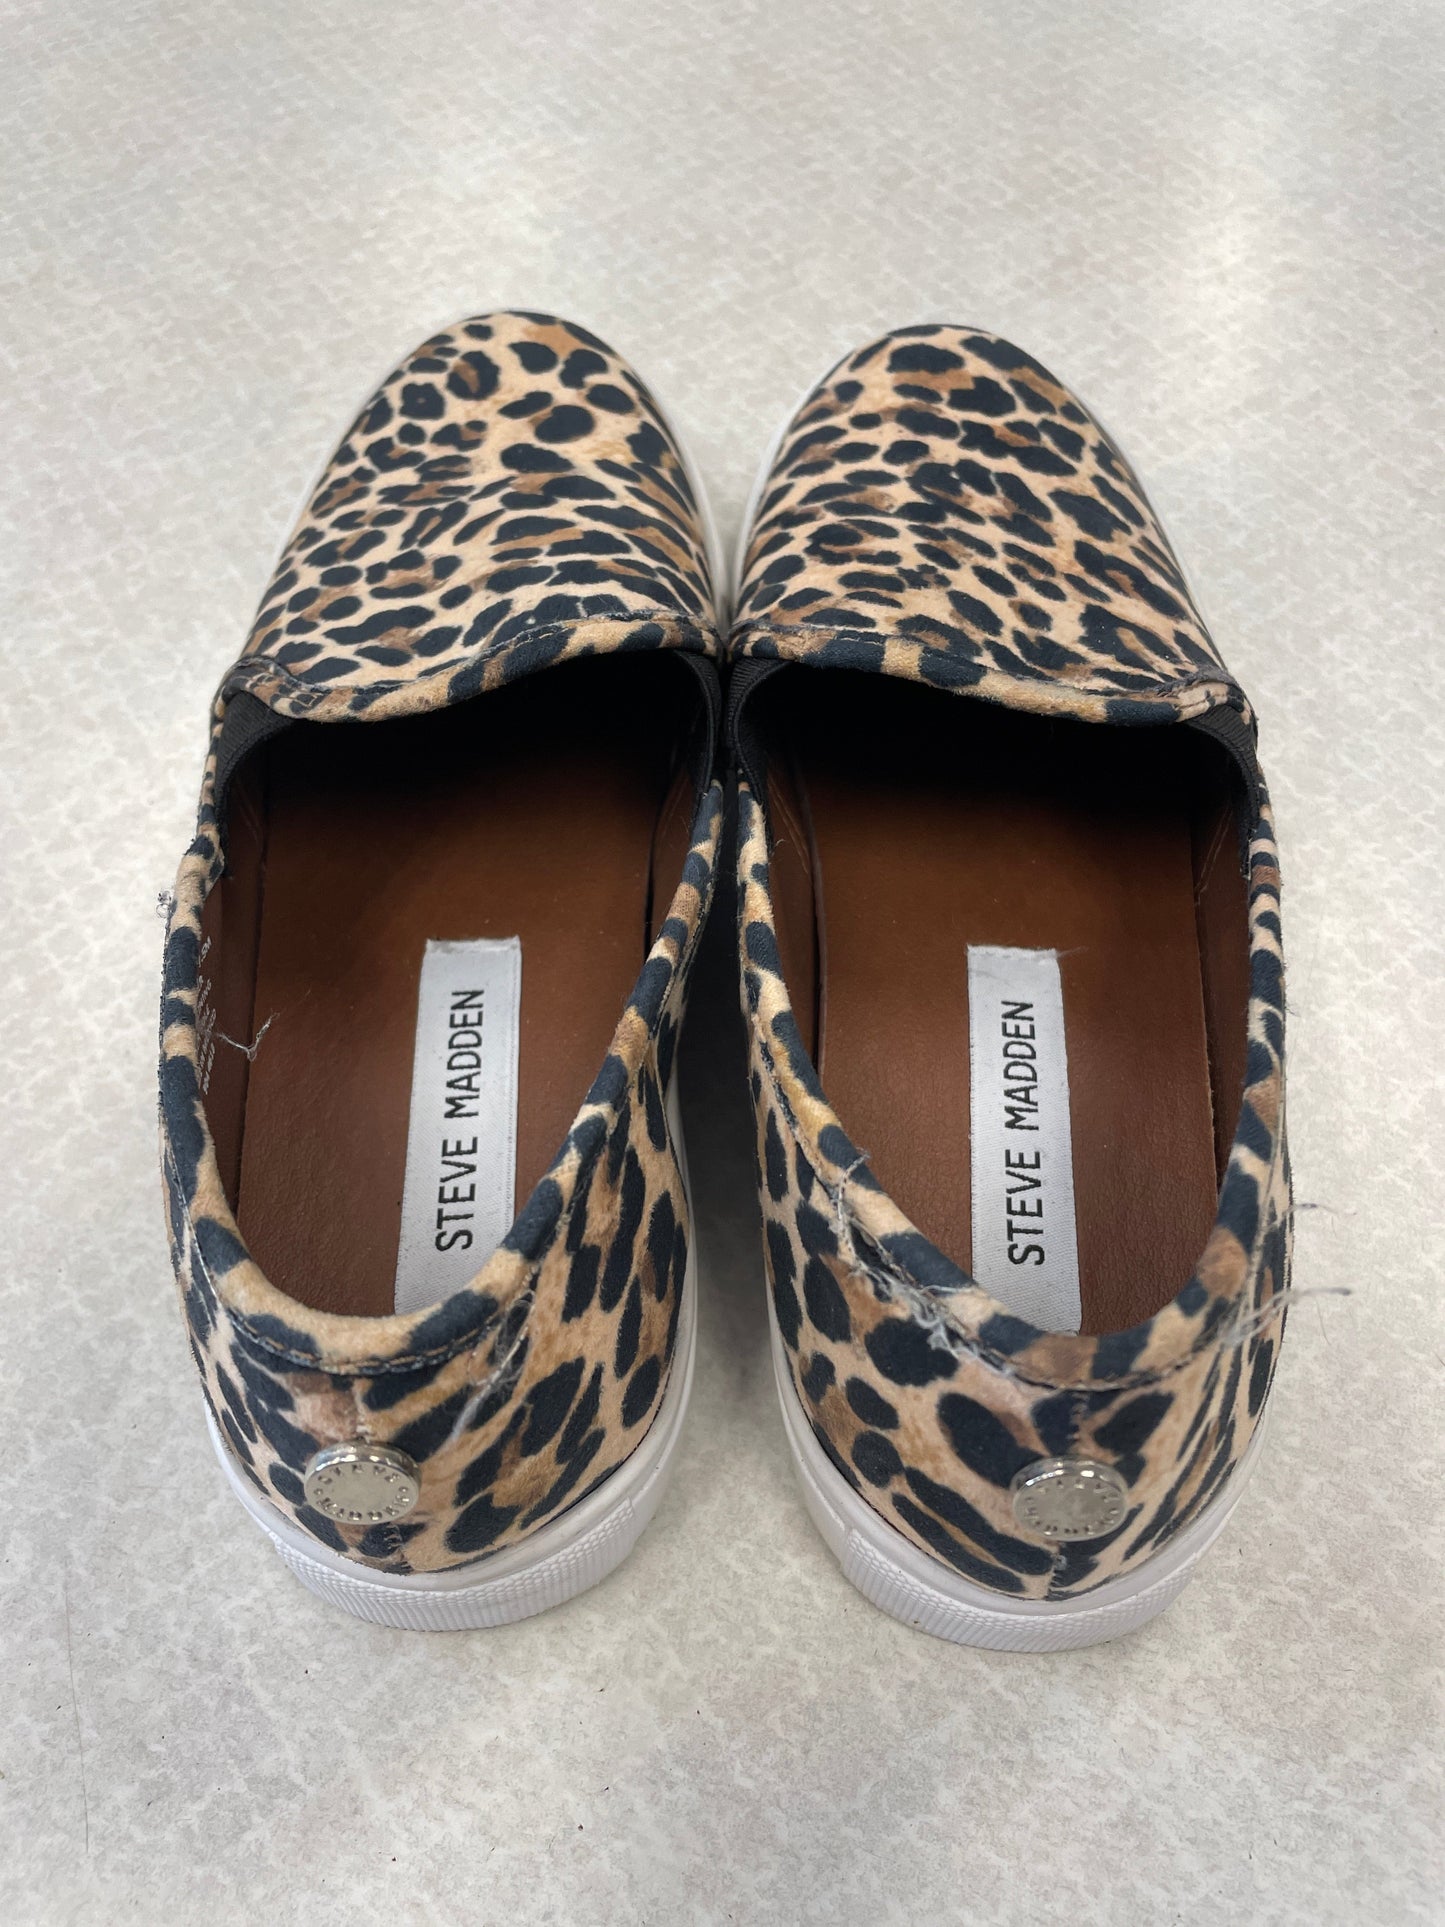 Shoes Flats By Steve Madden  Size: 7.5